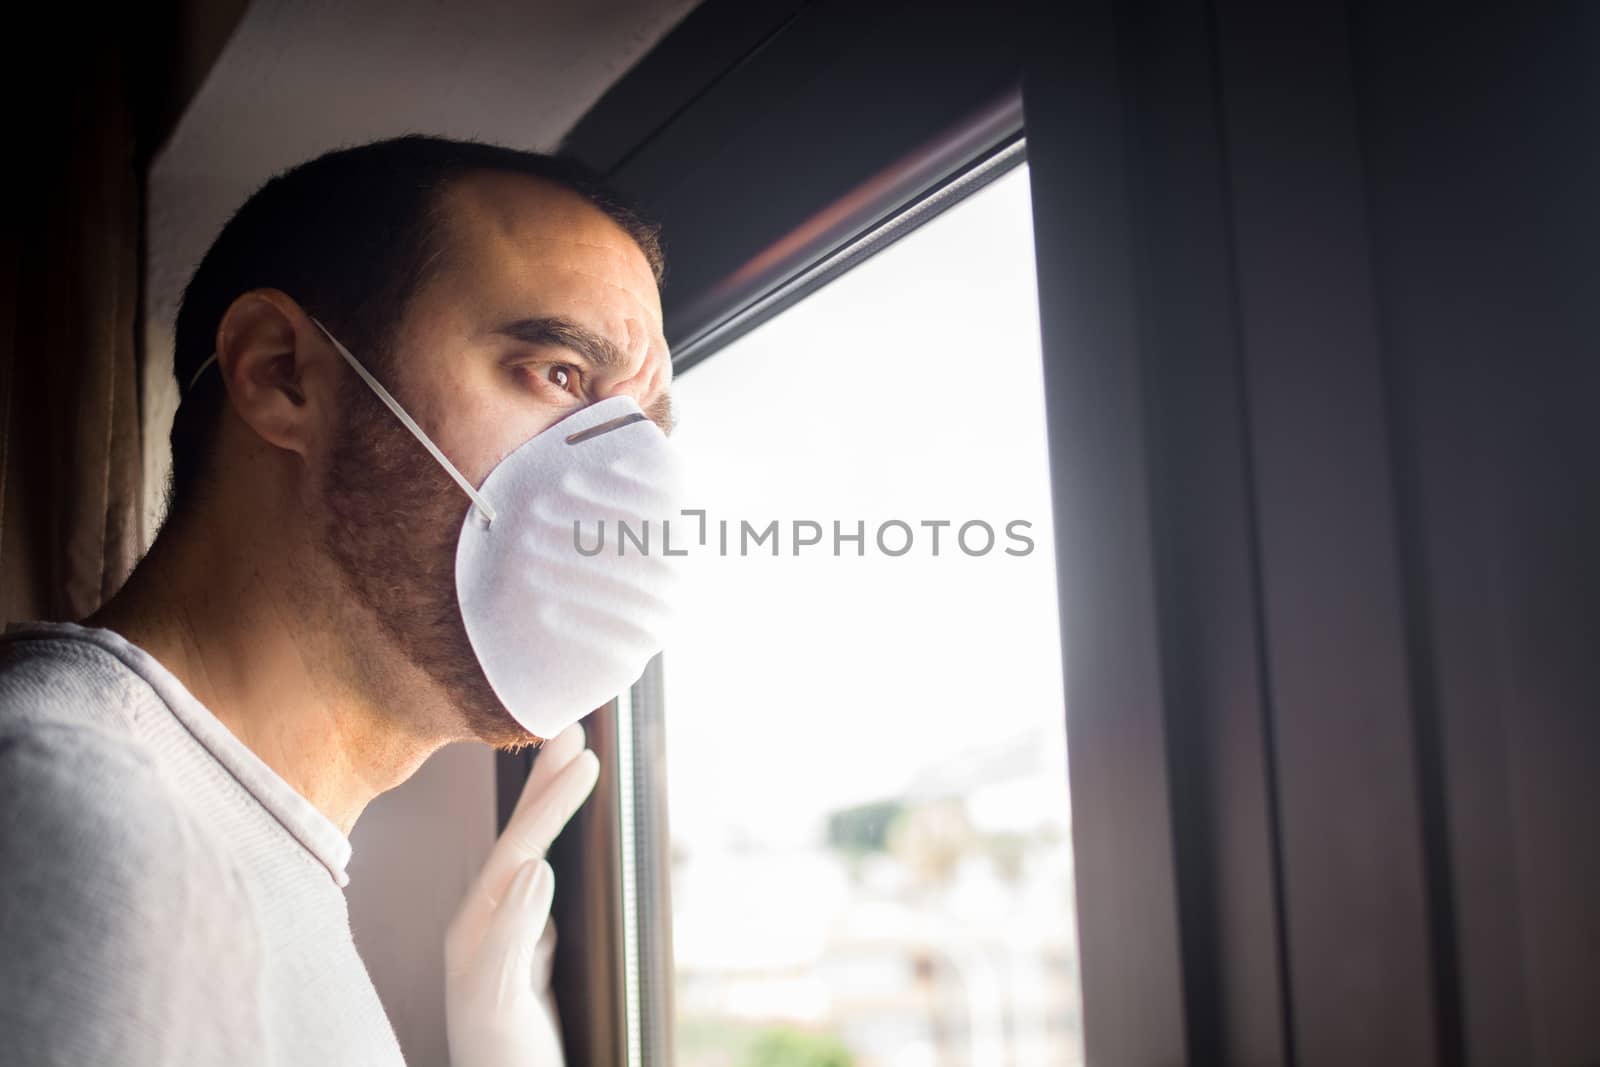 Man with face mask and gloves looking out the window. Stay at home concept.